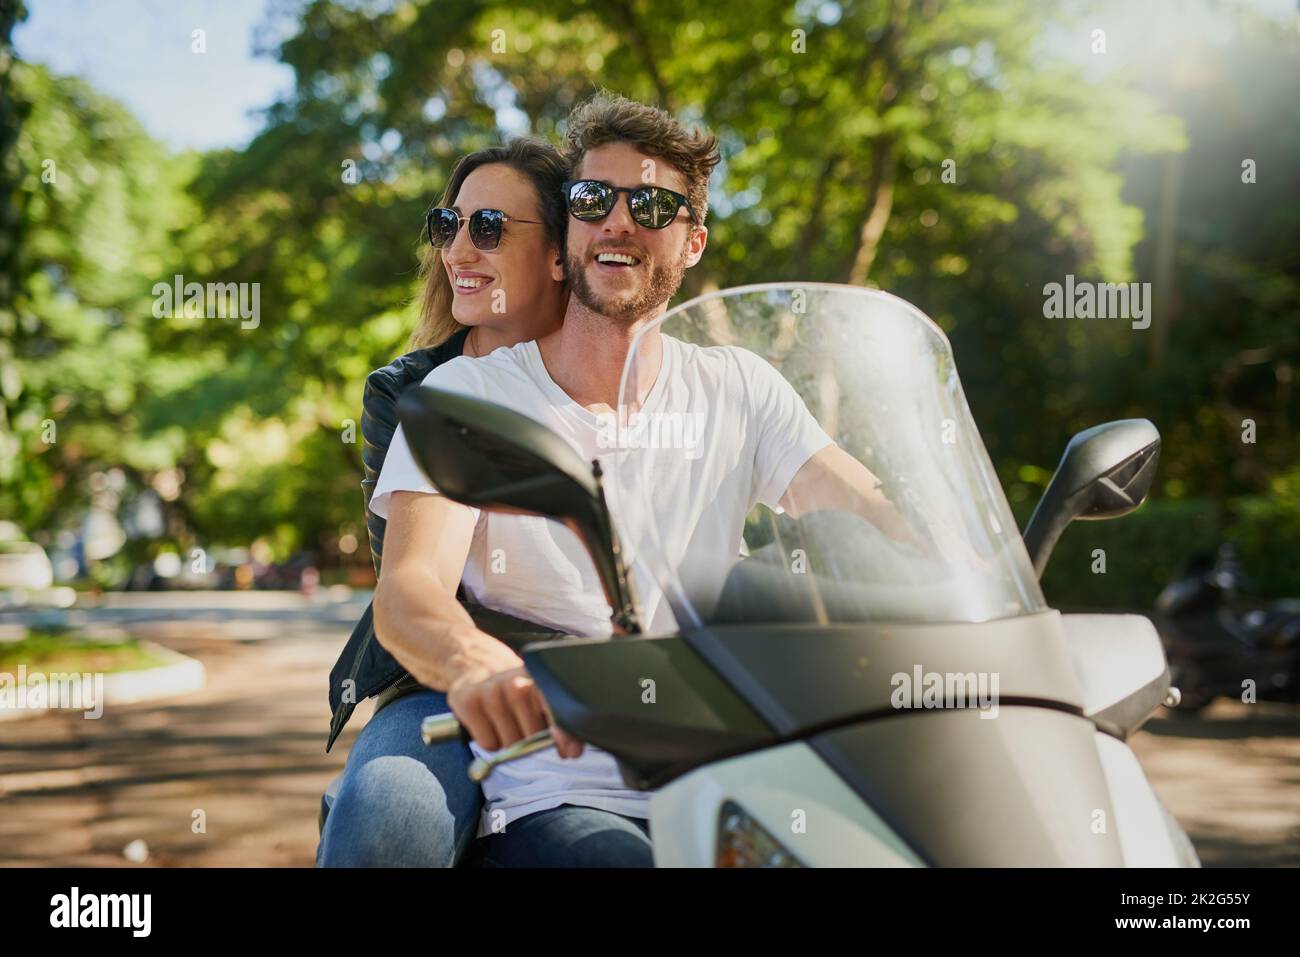 We fell in love with each other while exploring. Cropped shot of a young attractive couple riding a scooter around town. Stock Photo